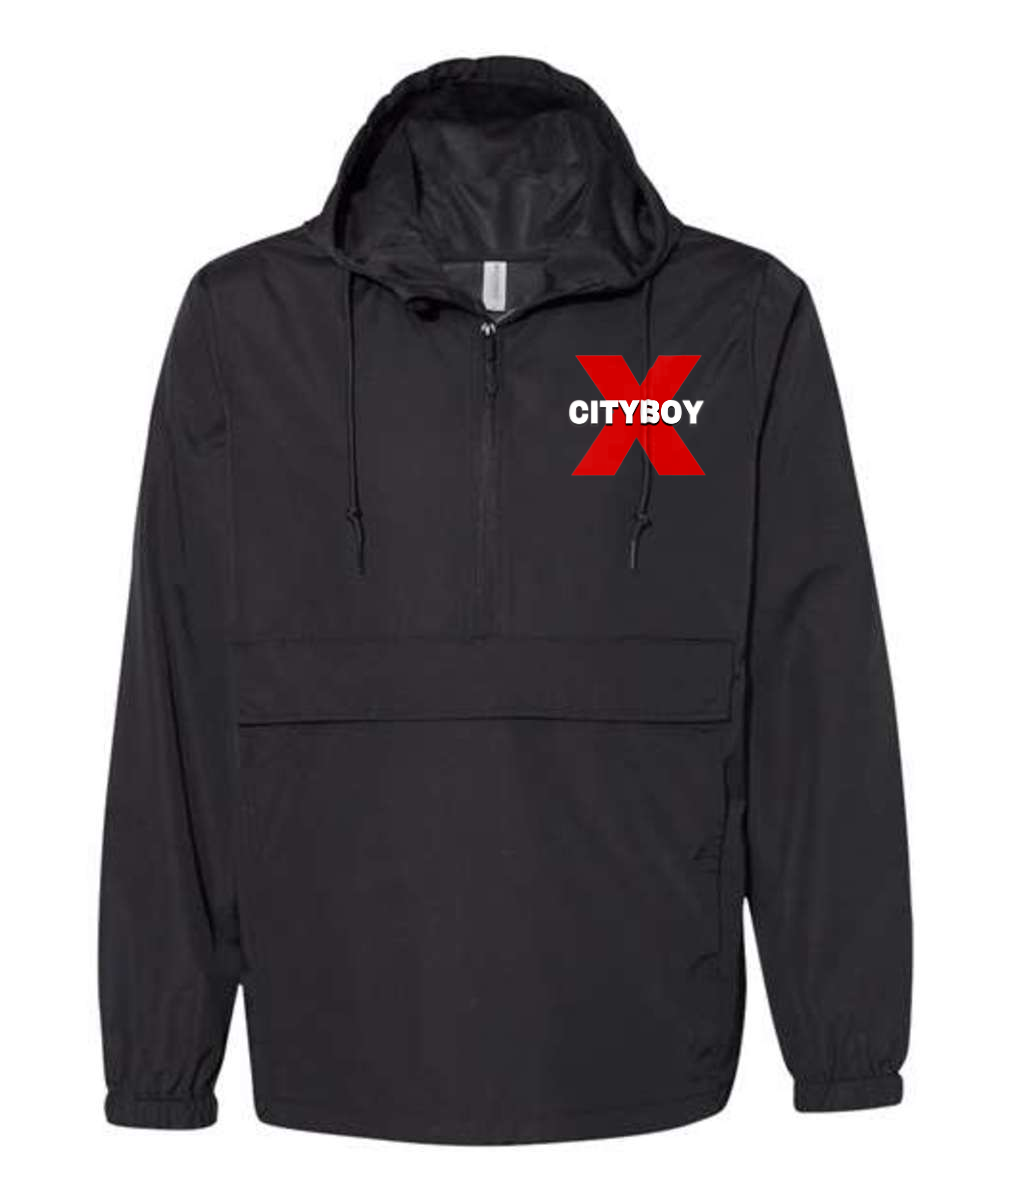 CITYBOY print Independent Trading Co. - Nylon Anorak Embroidered or Similar